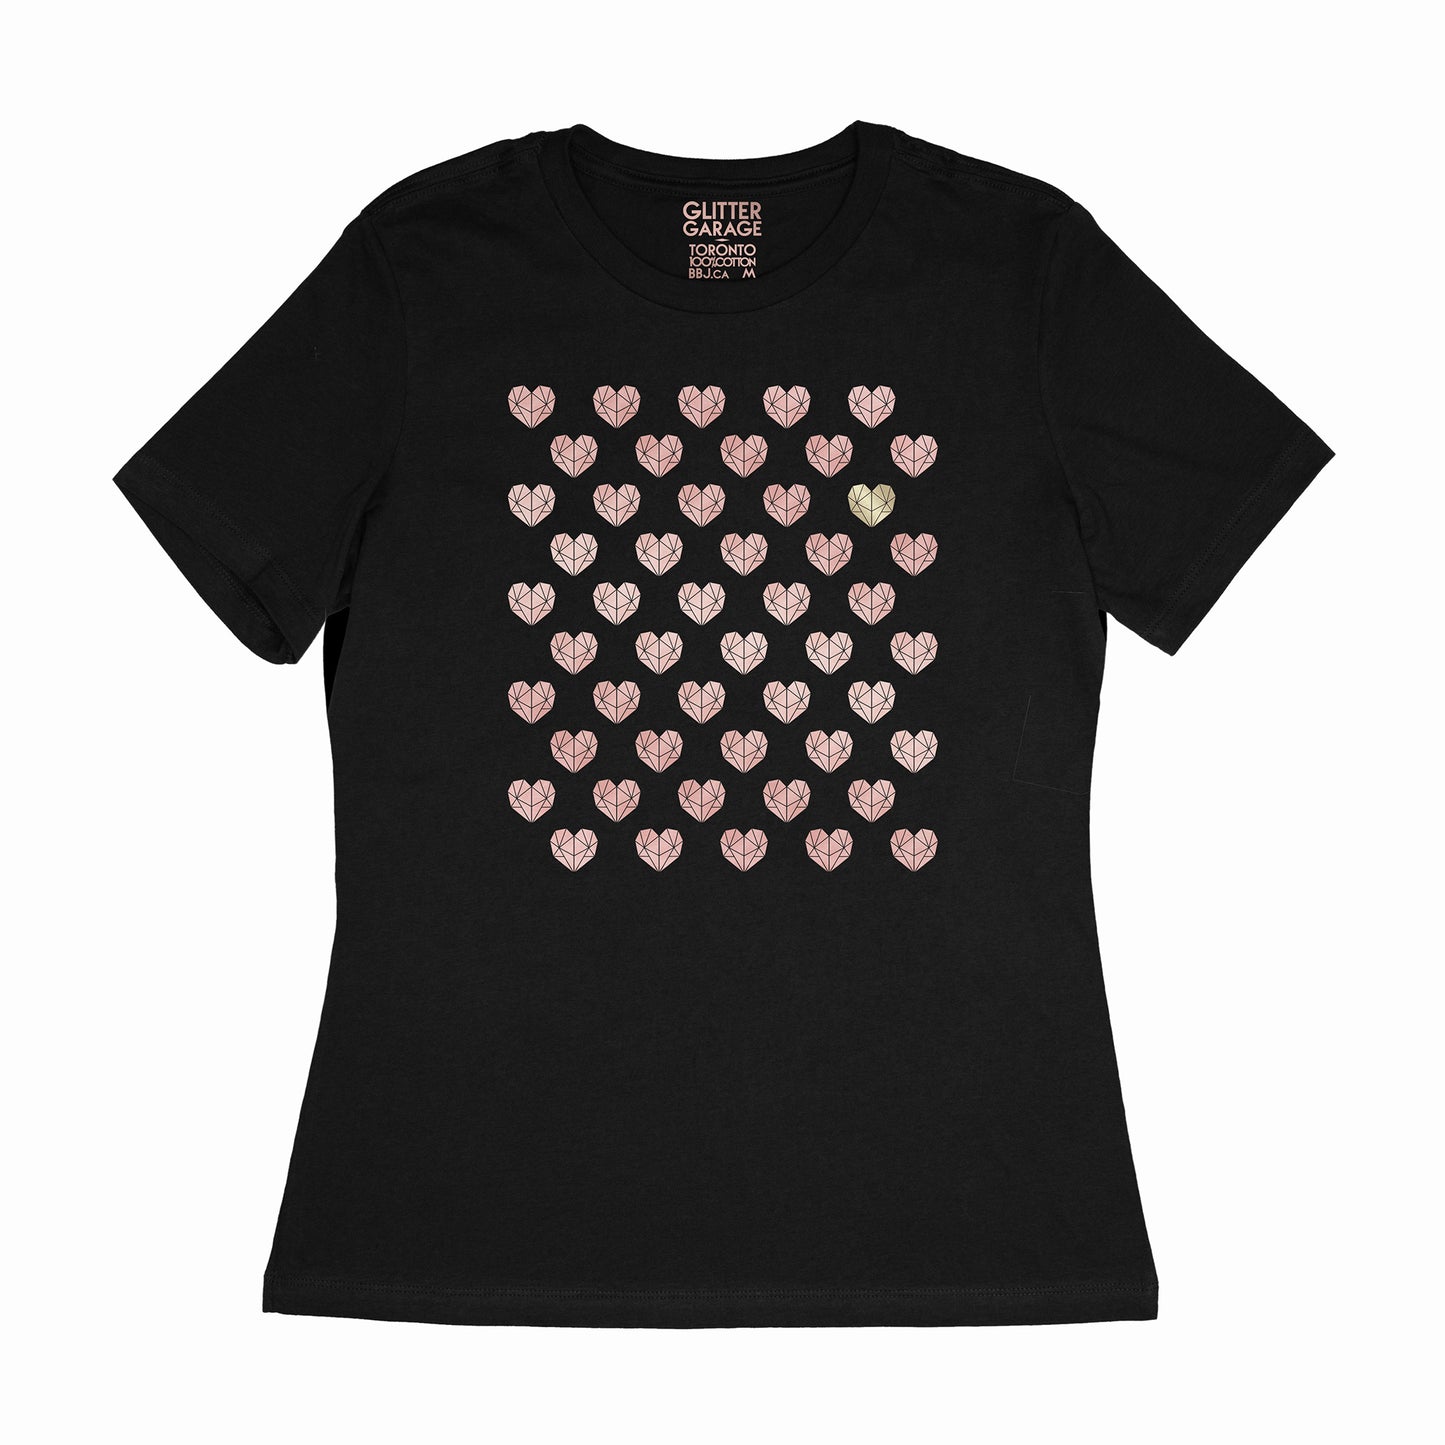 Many Hearts customizable tee - black women's relaxed fit tee with 50 hearts - rose gold, gold metallic by BBJ / Glitter Garage